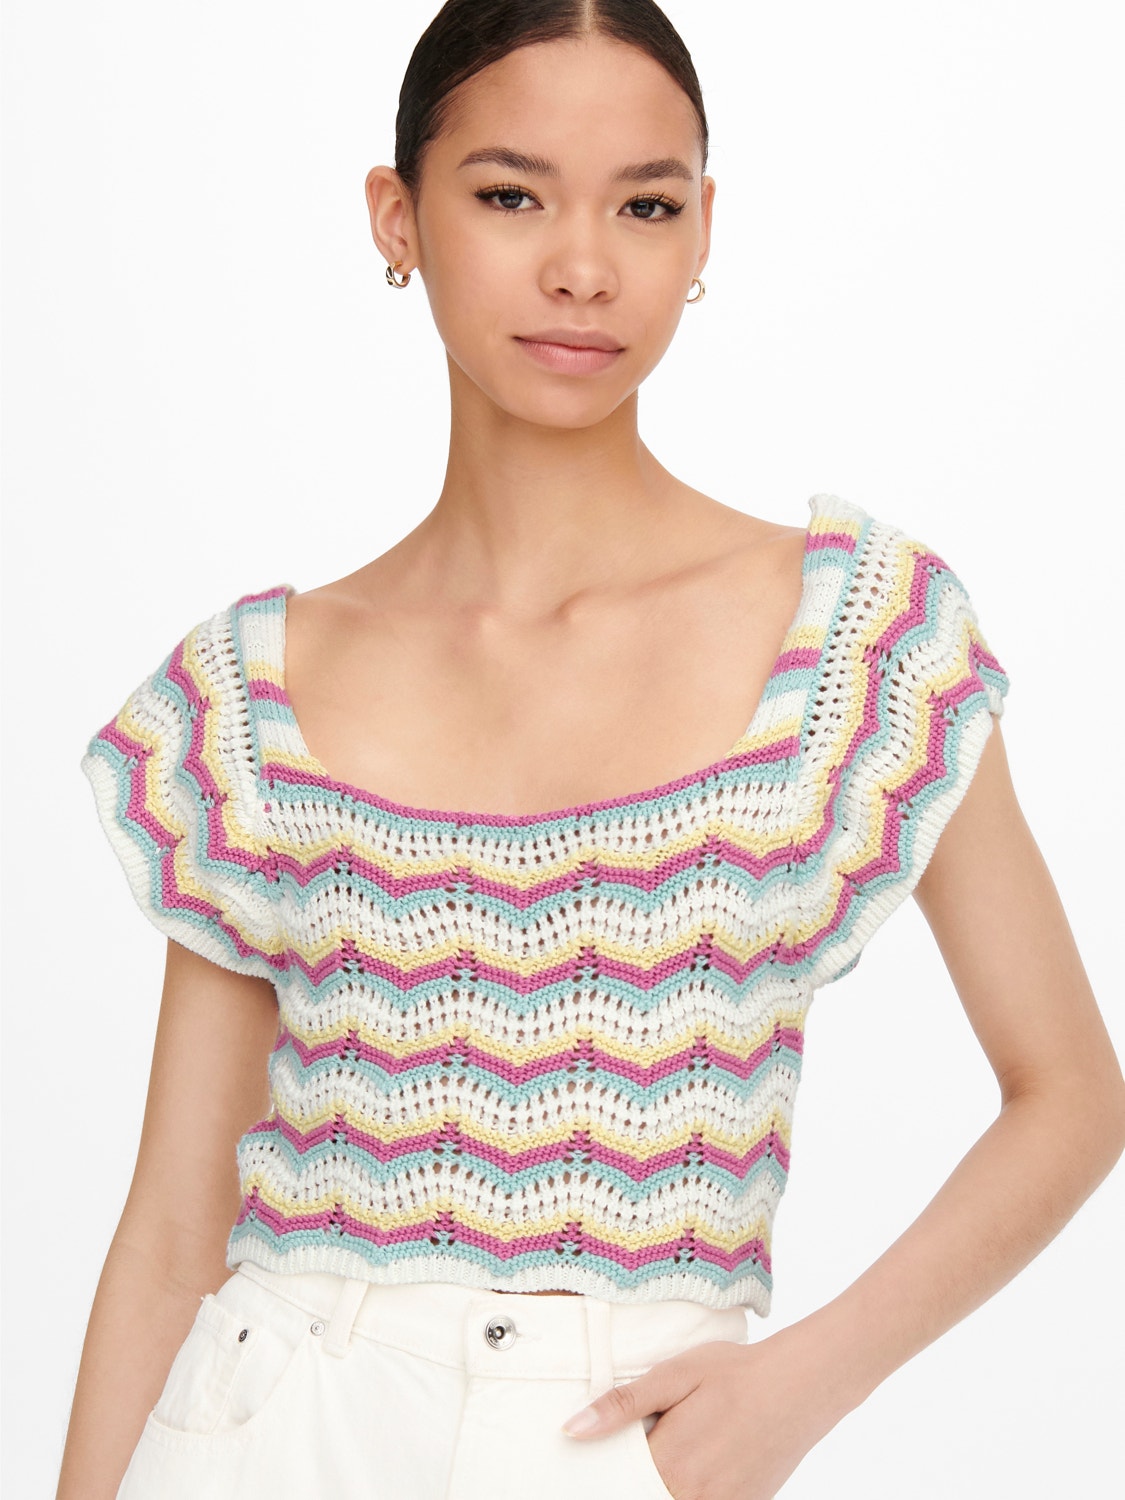 ONLY Pull-overs Col carré -Cloud Dancer - 15264359